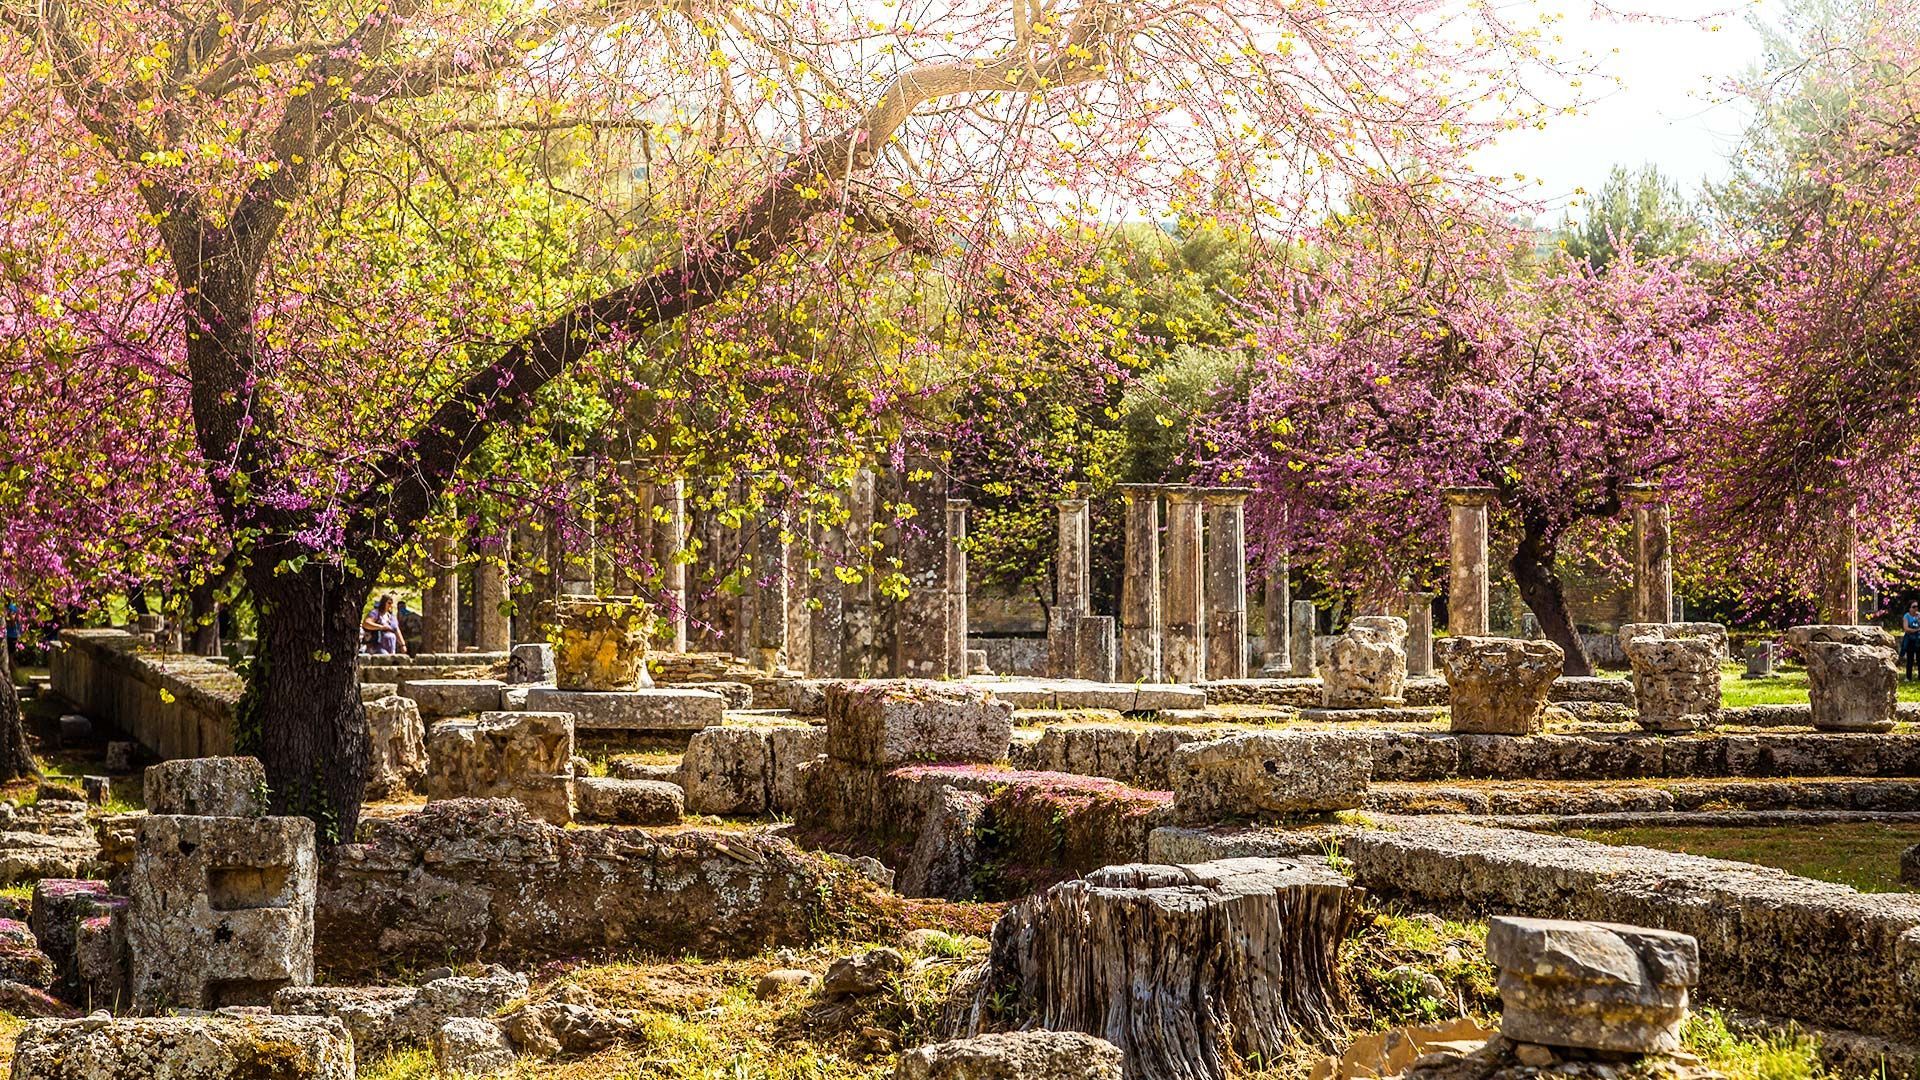 ancient olympia greece tours